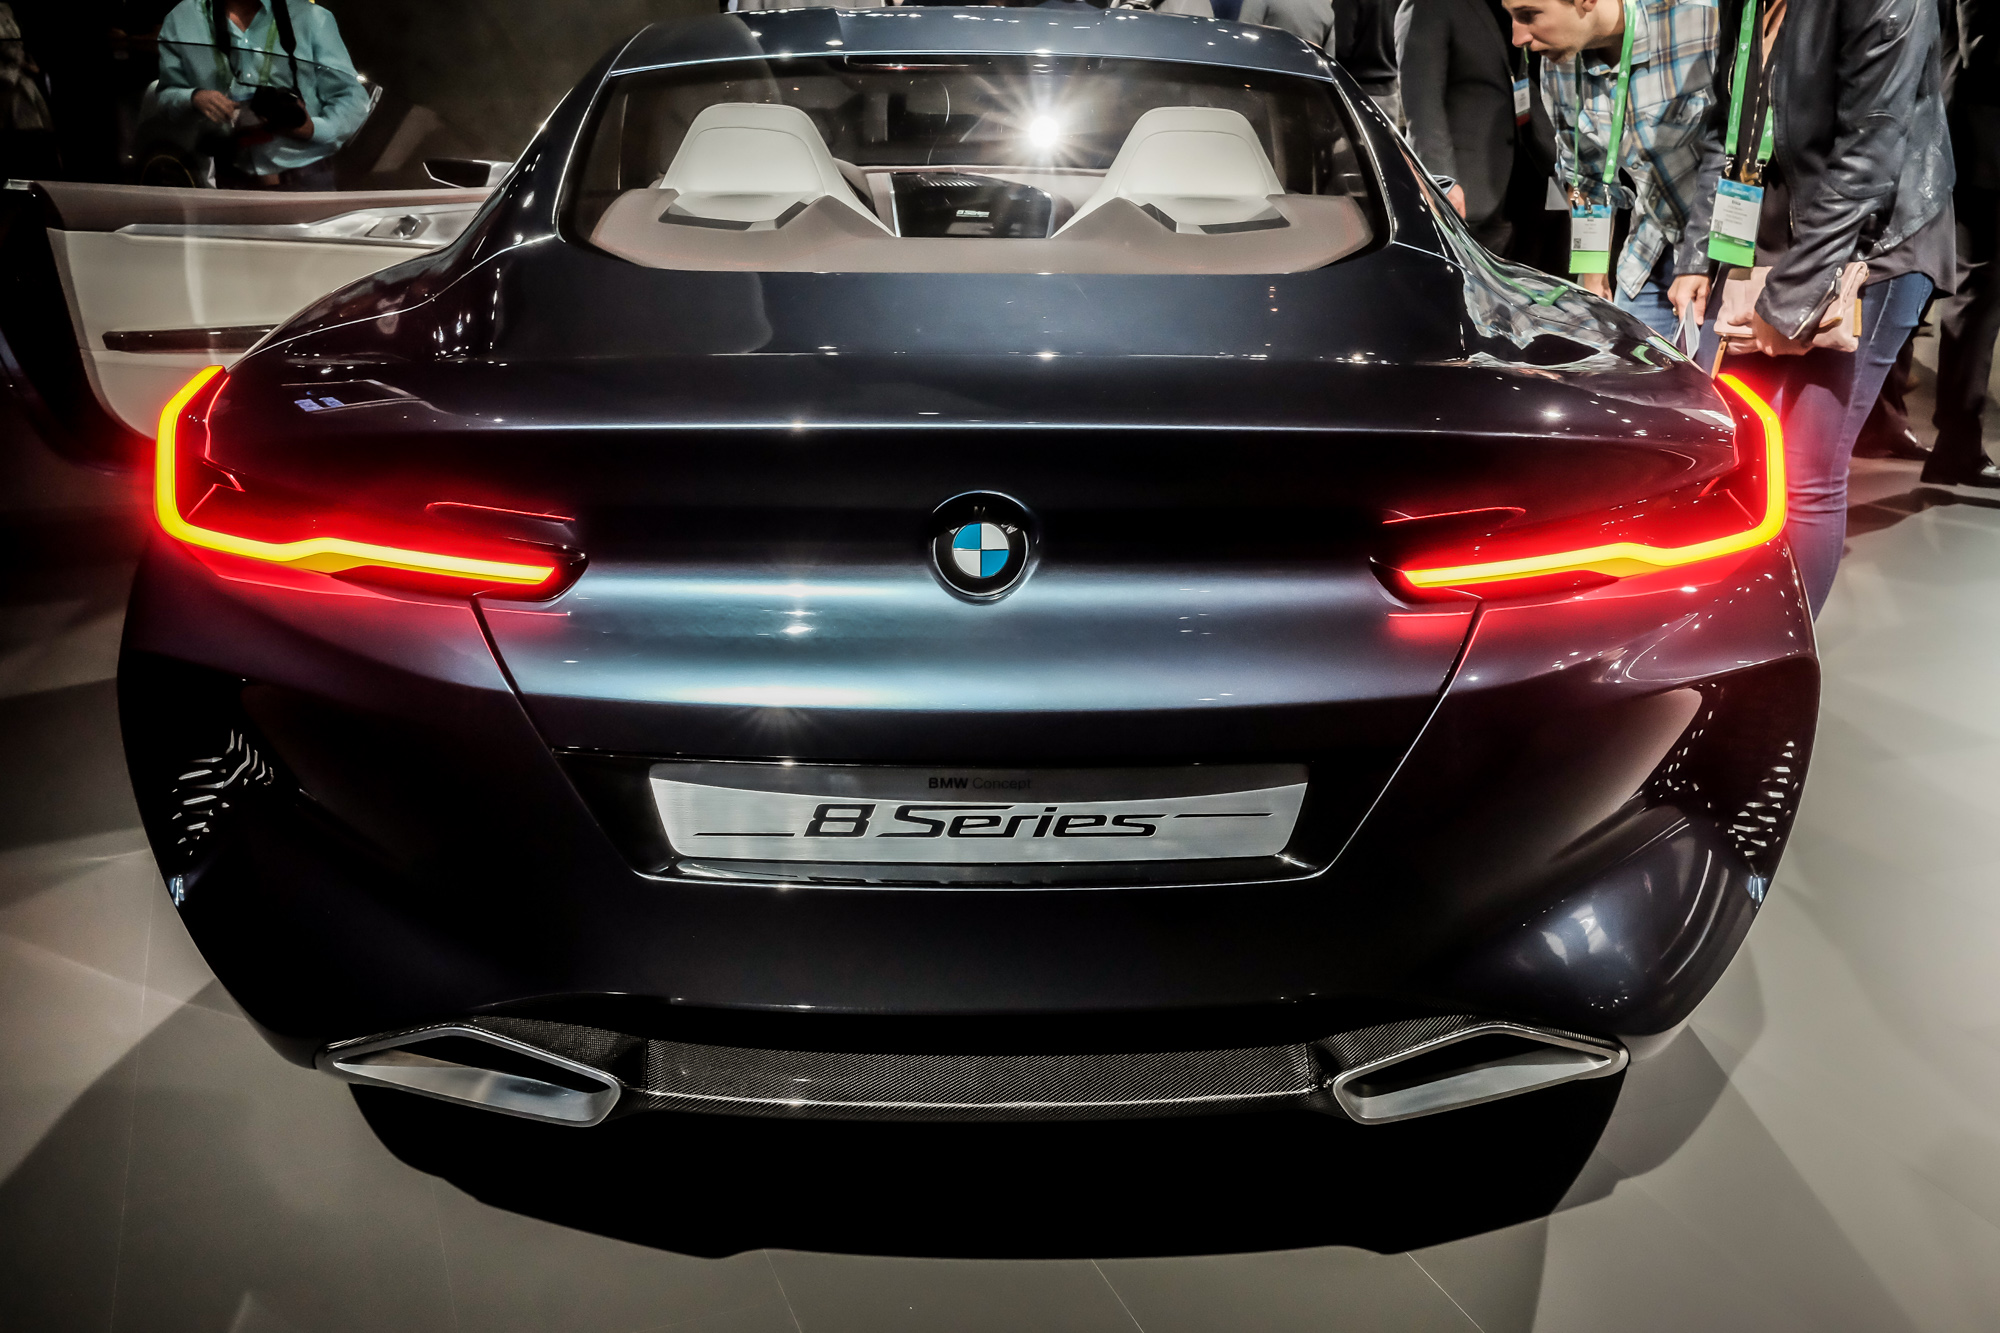 The Back end of the Concept 8 Series is stunning, <i>Sam Bendall</i>